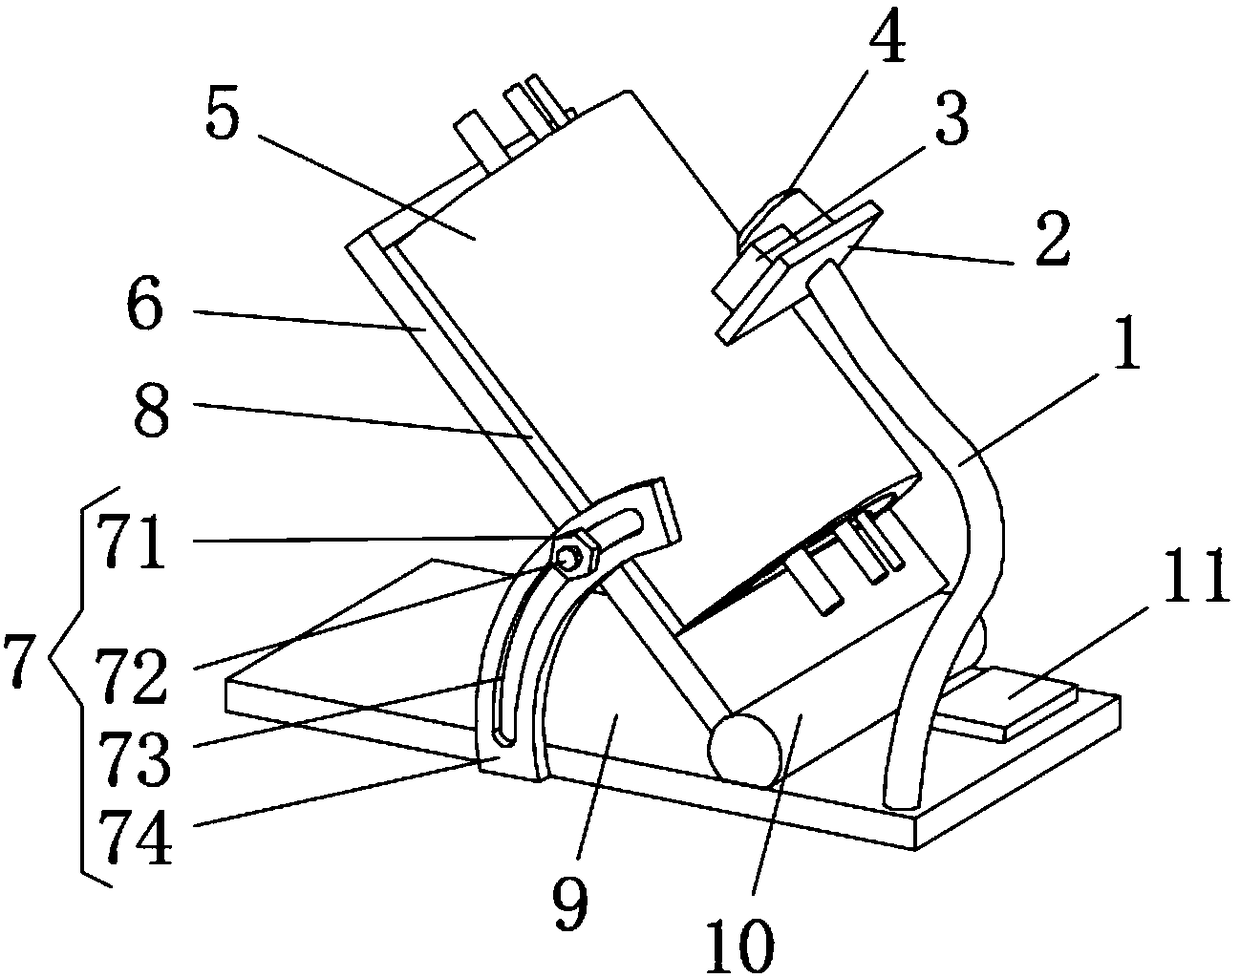 Preventive medical inoculation auxiliary teaching device